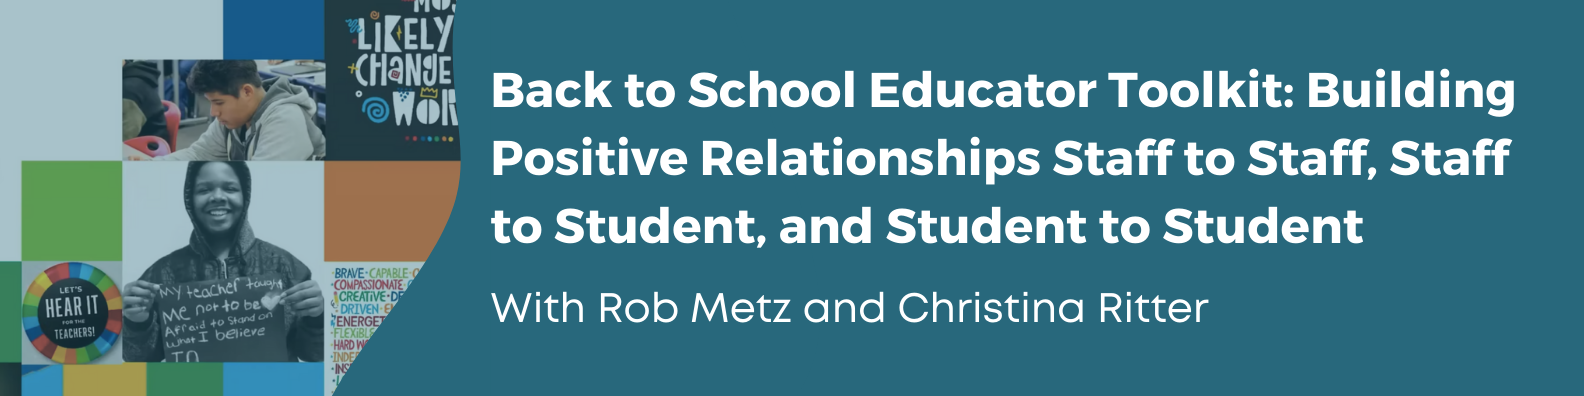 Back to School Educator Toolkit: Building Positive Relationships Staff to Staff, Staff to Student, and Student to Student with Rob Metz and Christina Ritter